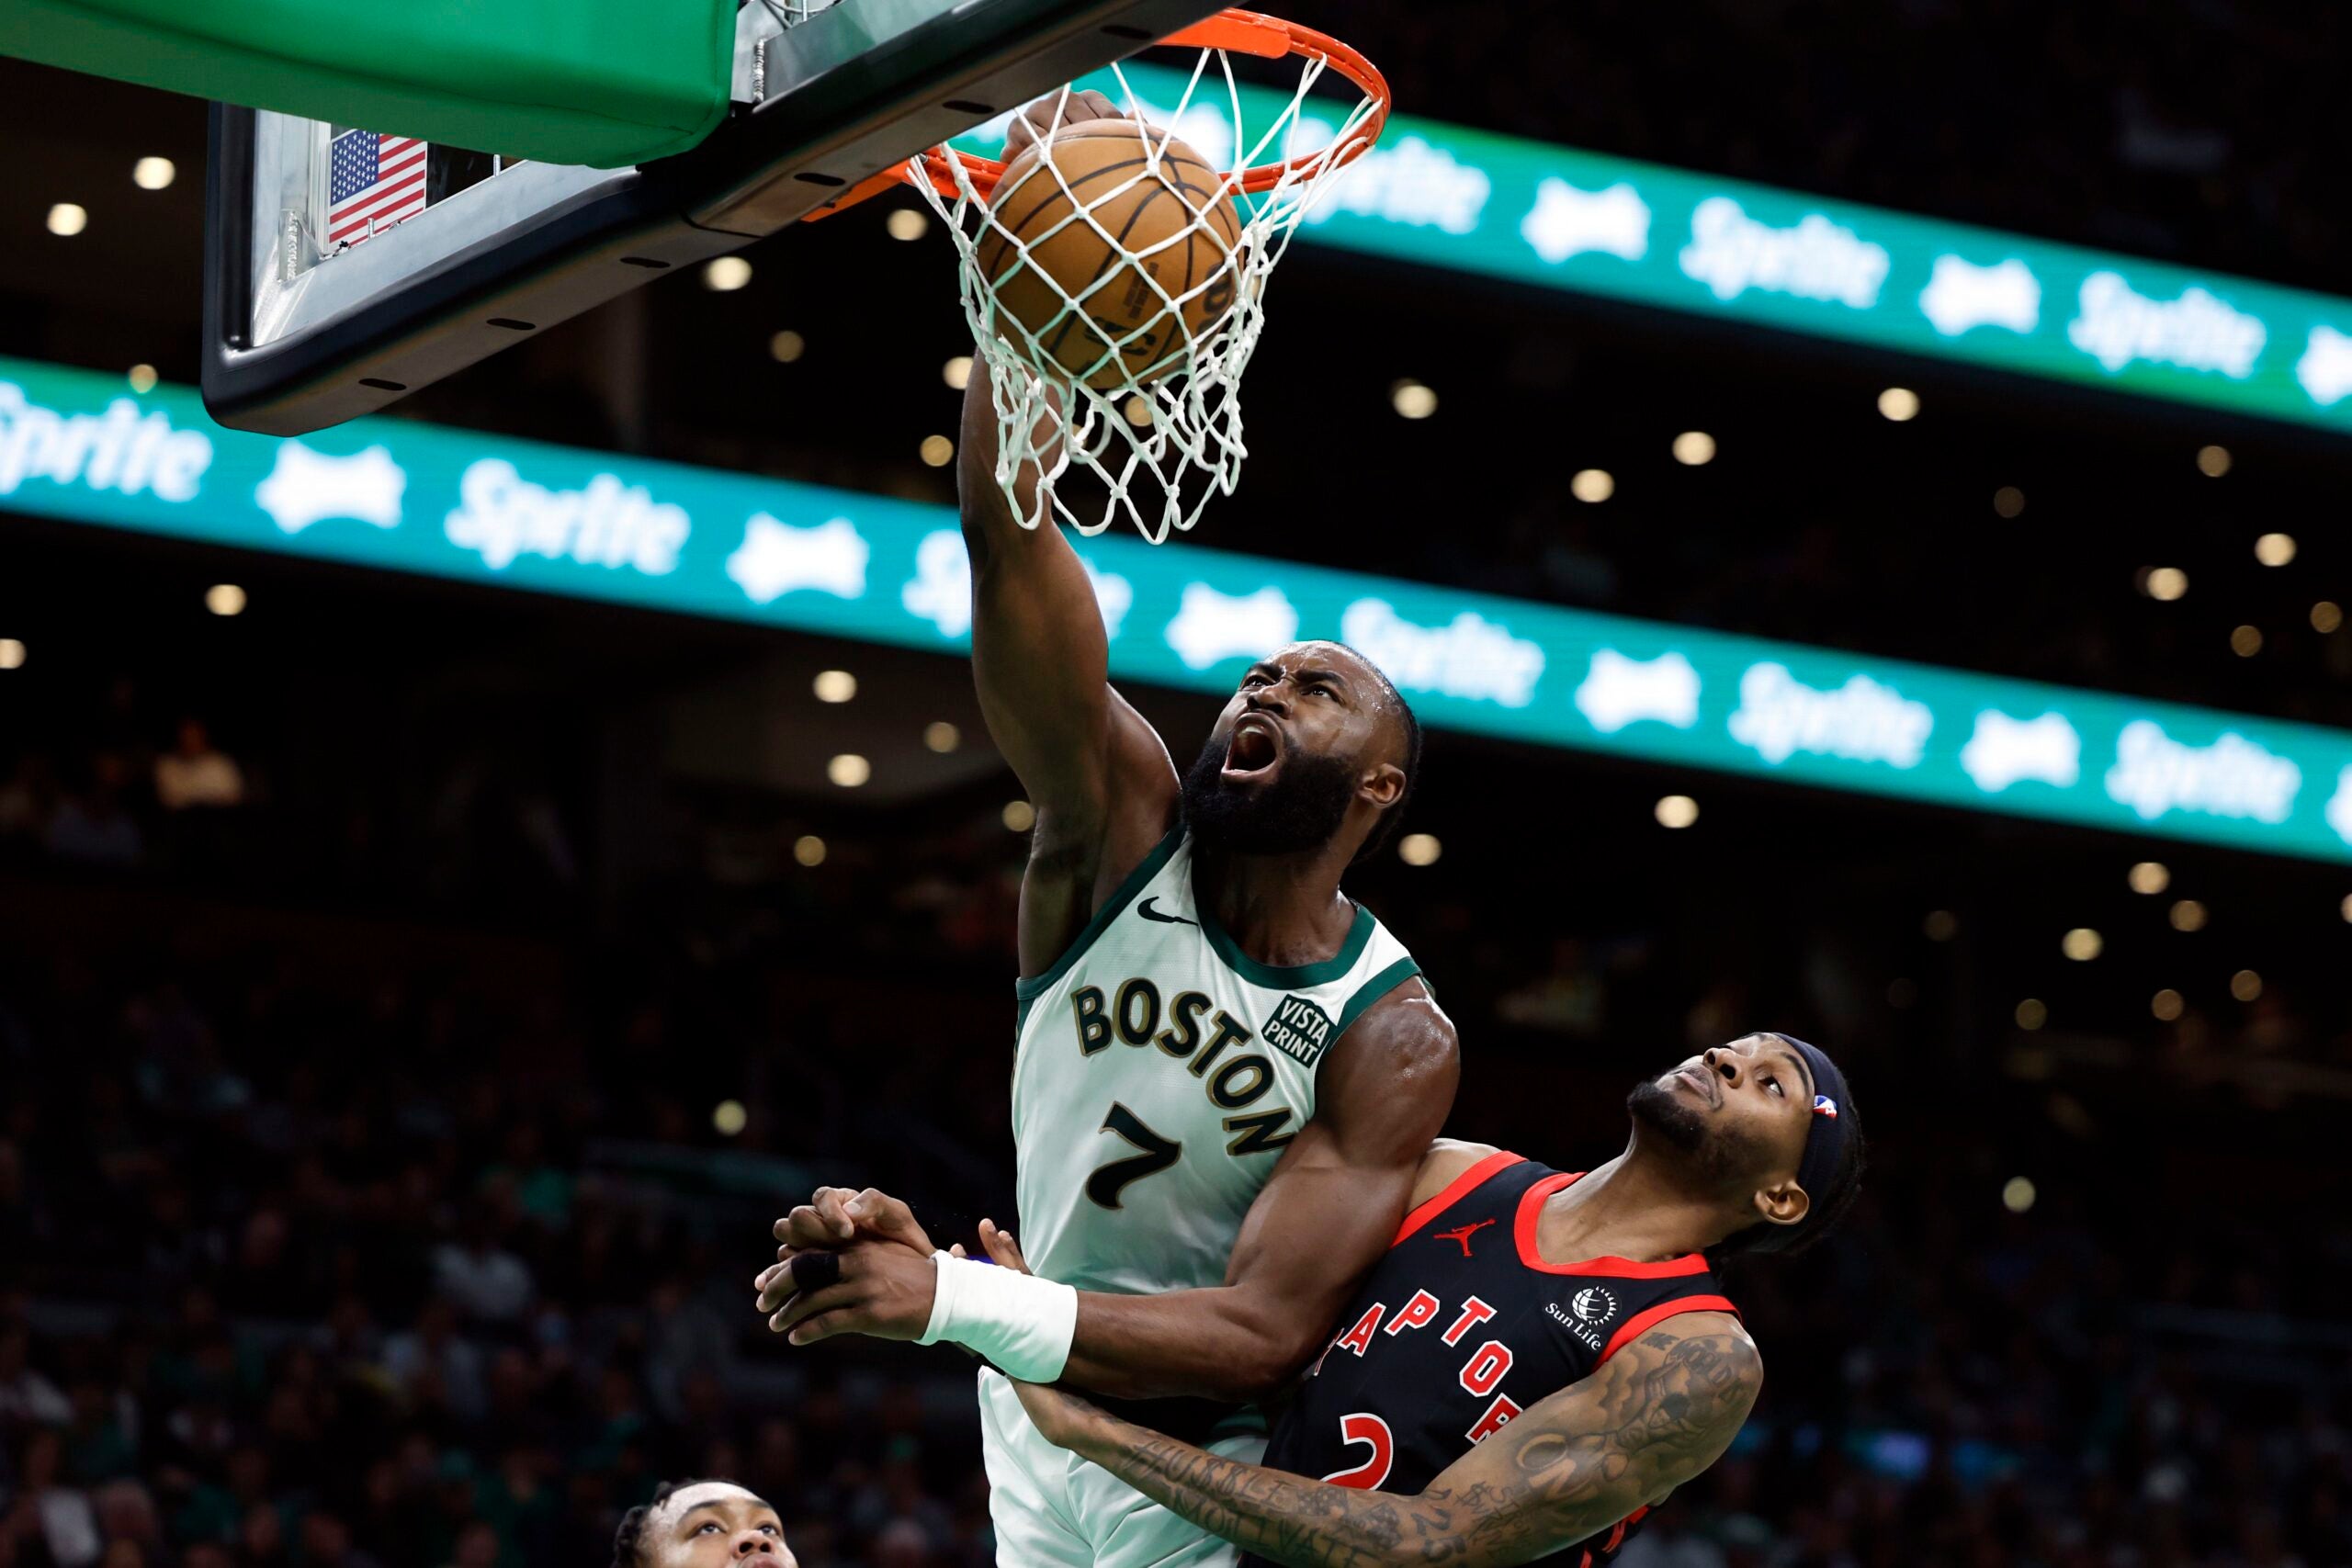 Jaylen Brown explains why he felt drawn to the Slam Dunk Contest